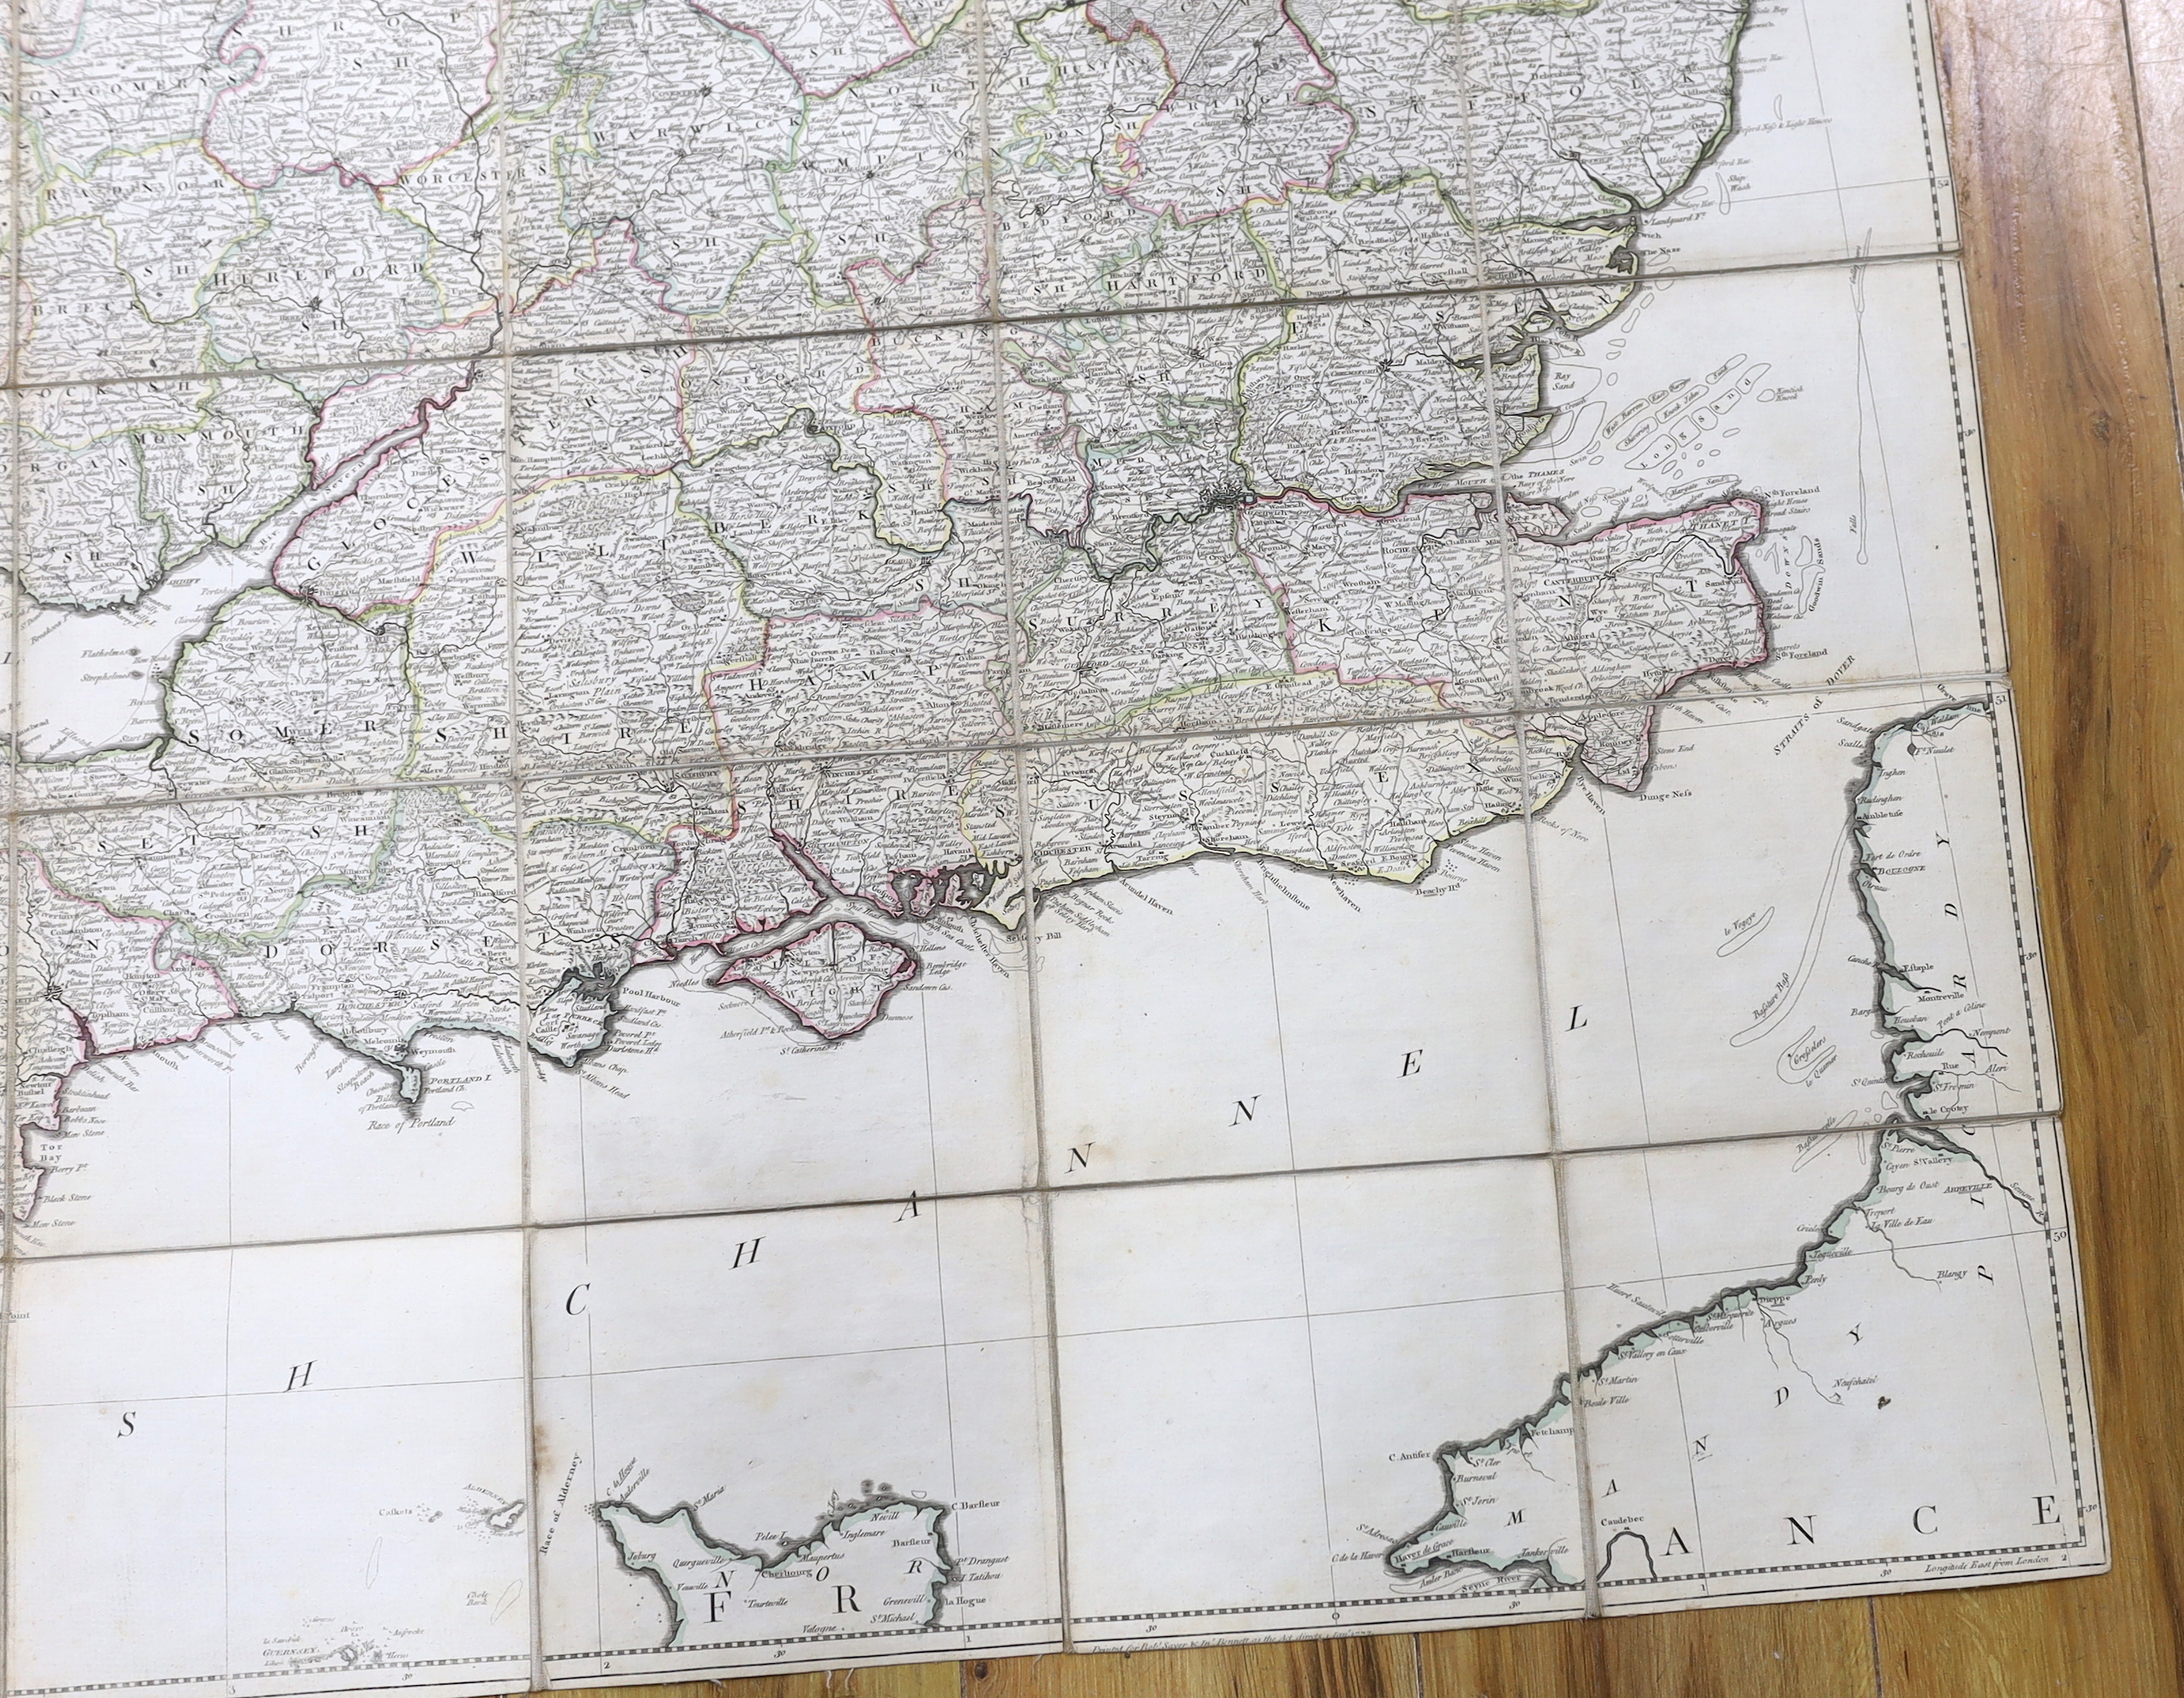 Kitchen, Thomas - South Britain or England and Wales, Drawn from several Surveys & C on the New Projection corrected from Astrometrical Observations…a hand-coloured engraved folding map, linen backed, Robert Sawyer and J